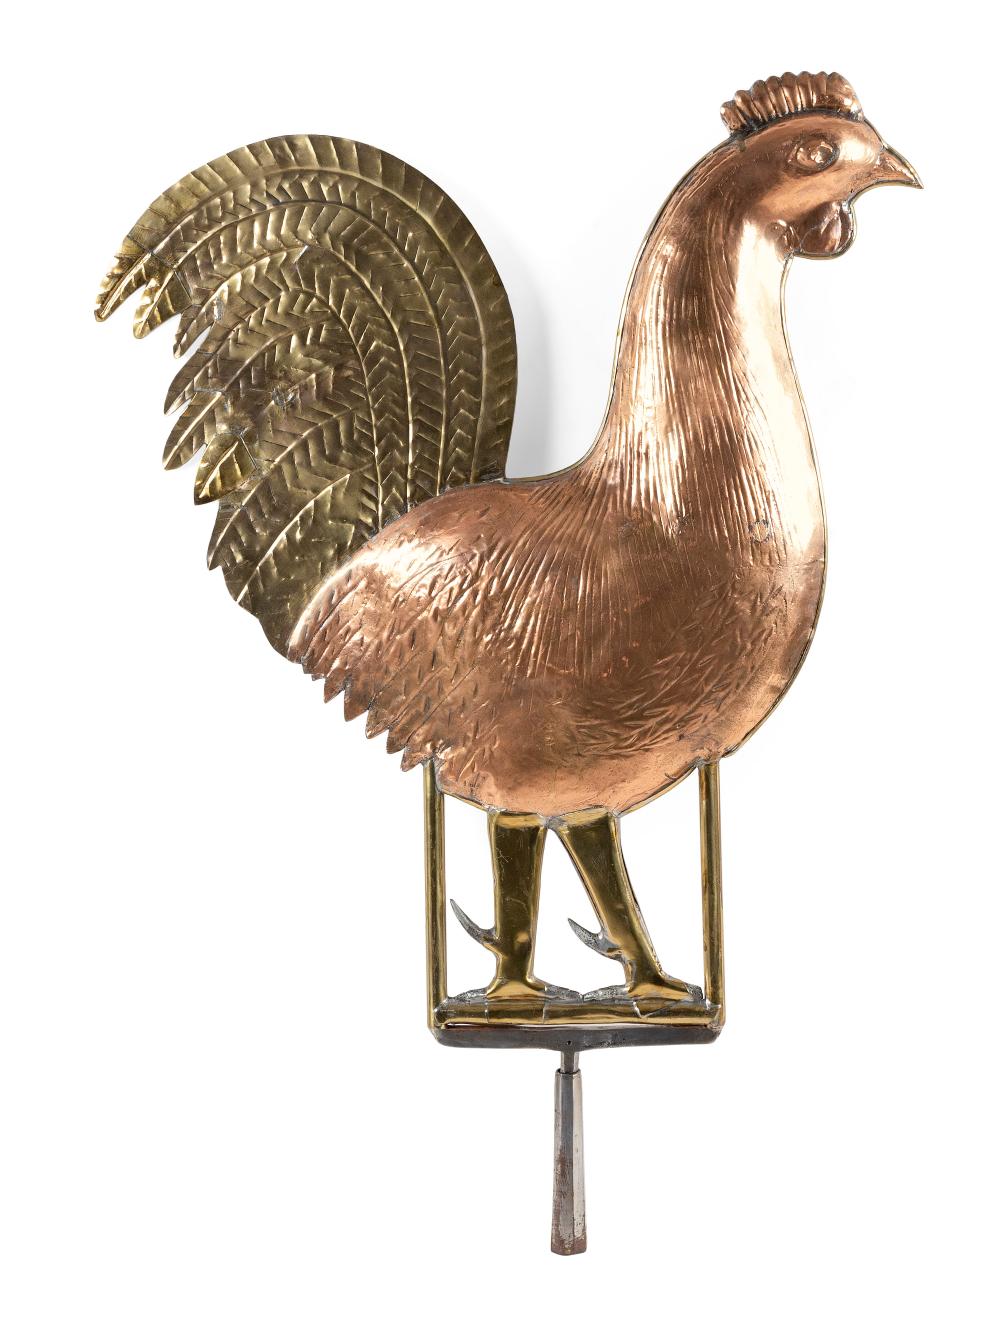 COPPER AND BRASS ROOSTER WEATHER